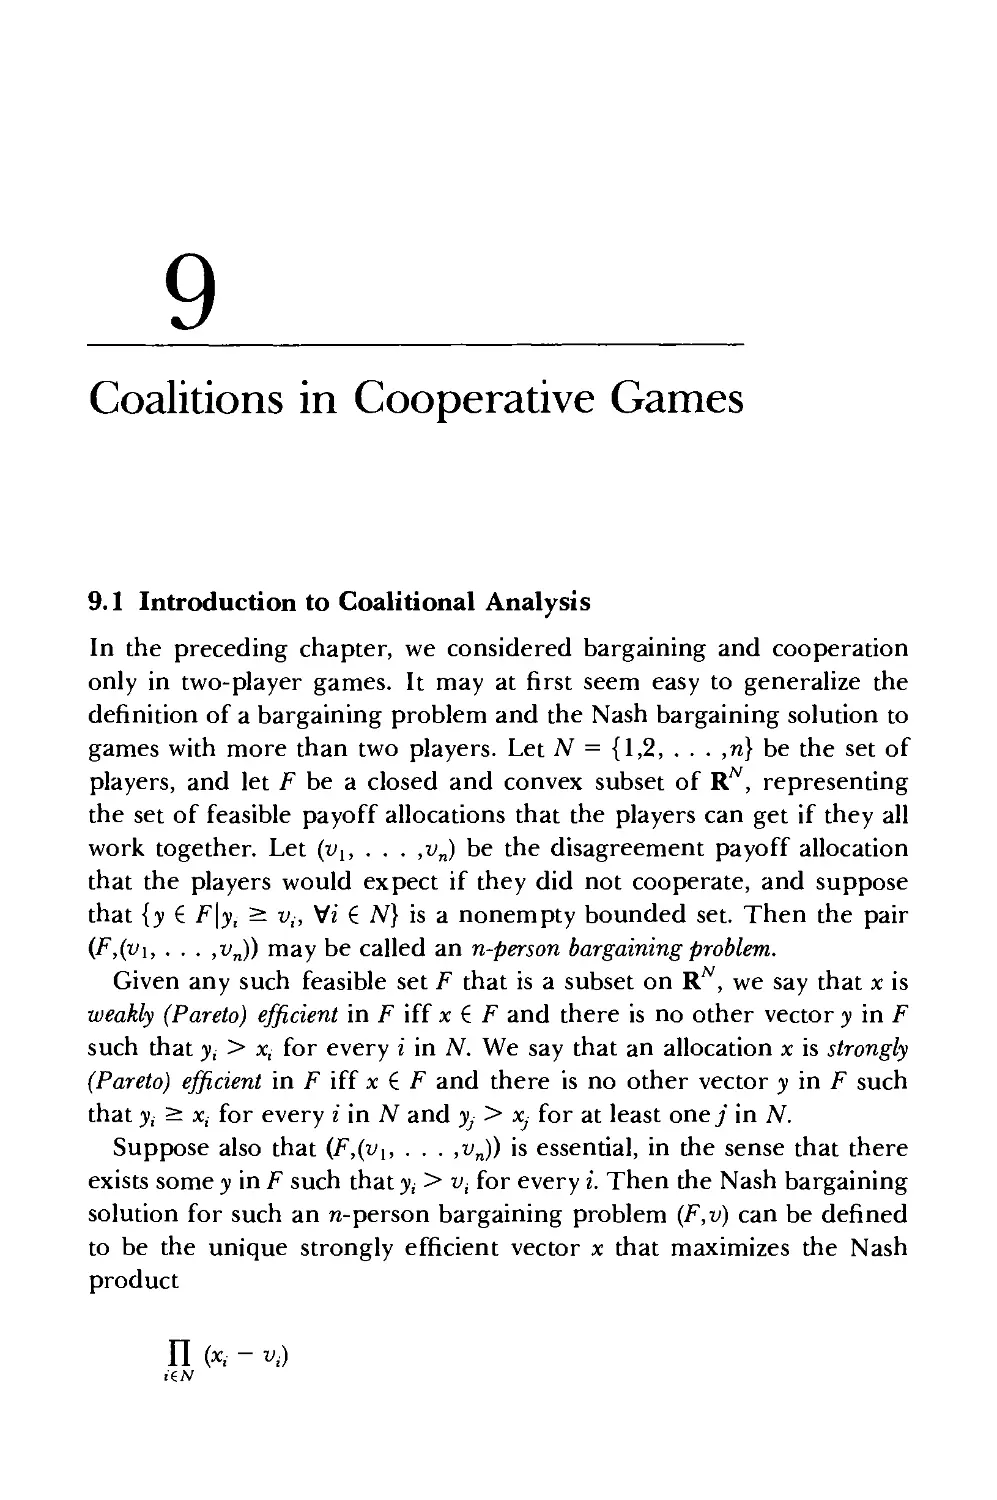 9 Coalitions in Cooperative Games